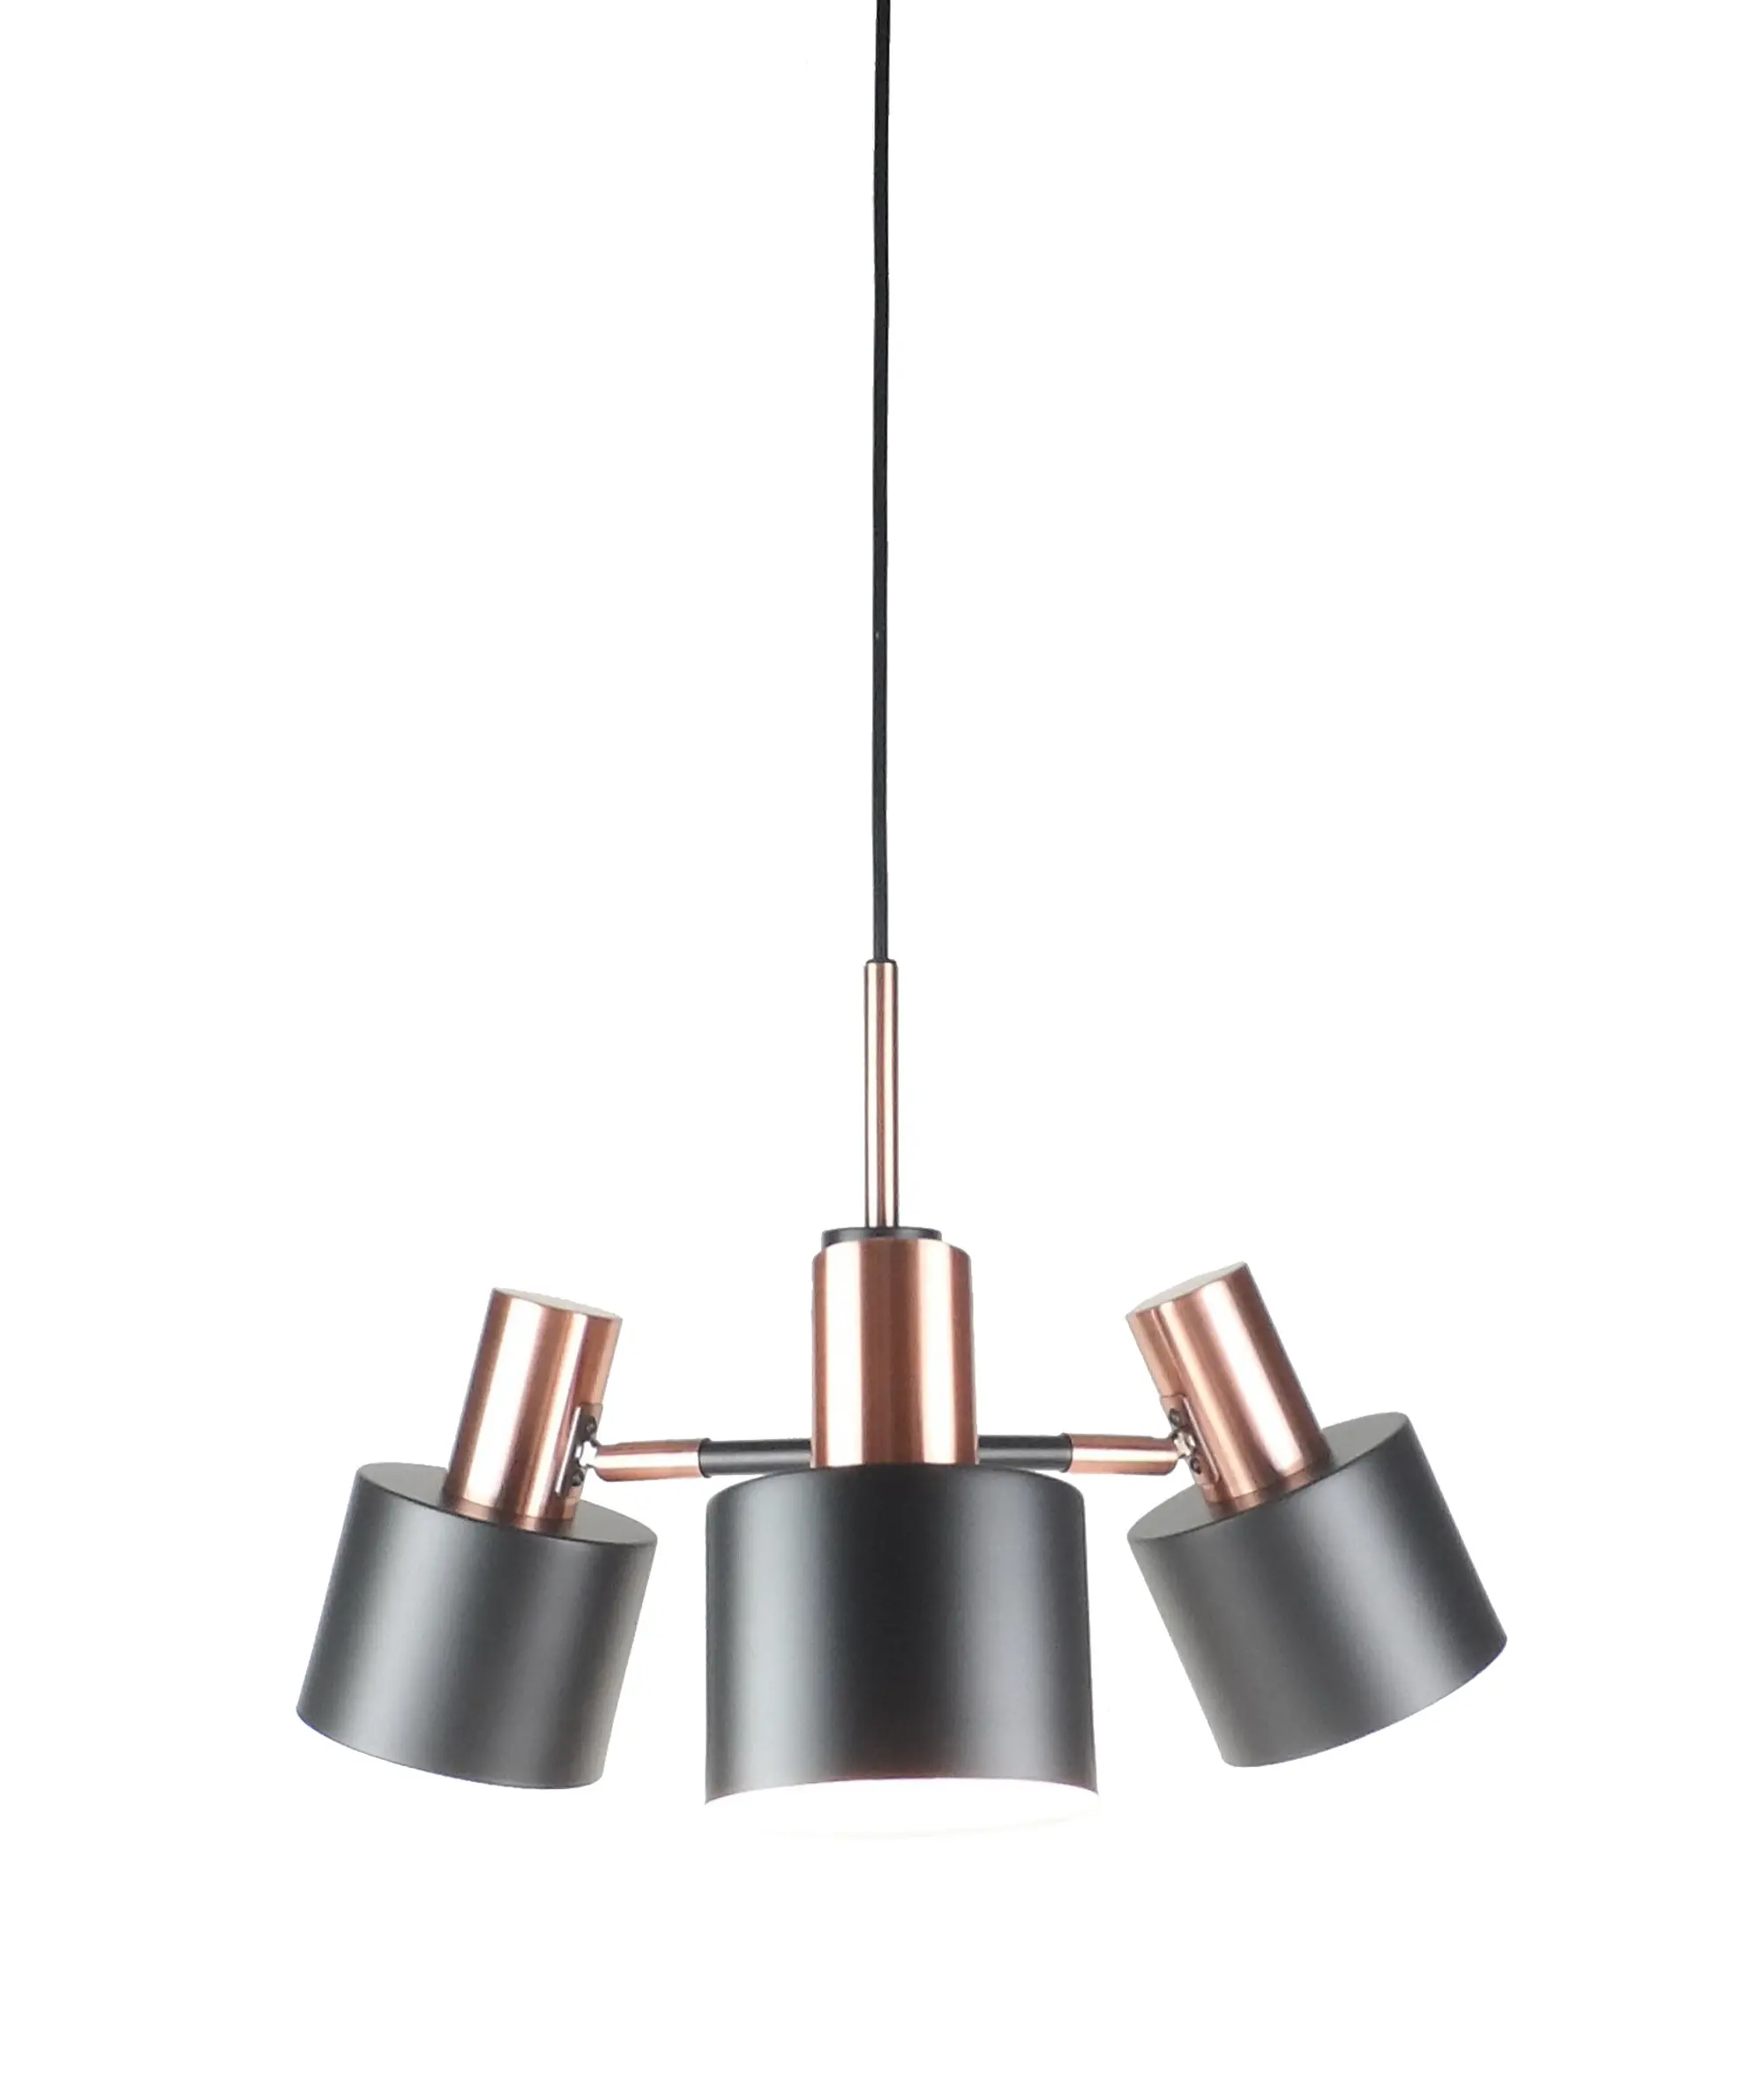 Modern E27 metal pendant light or ceiling 3-light with adjustable heads